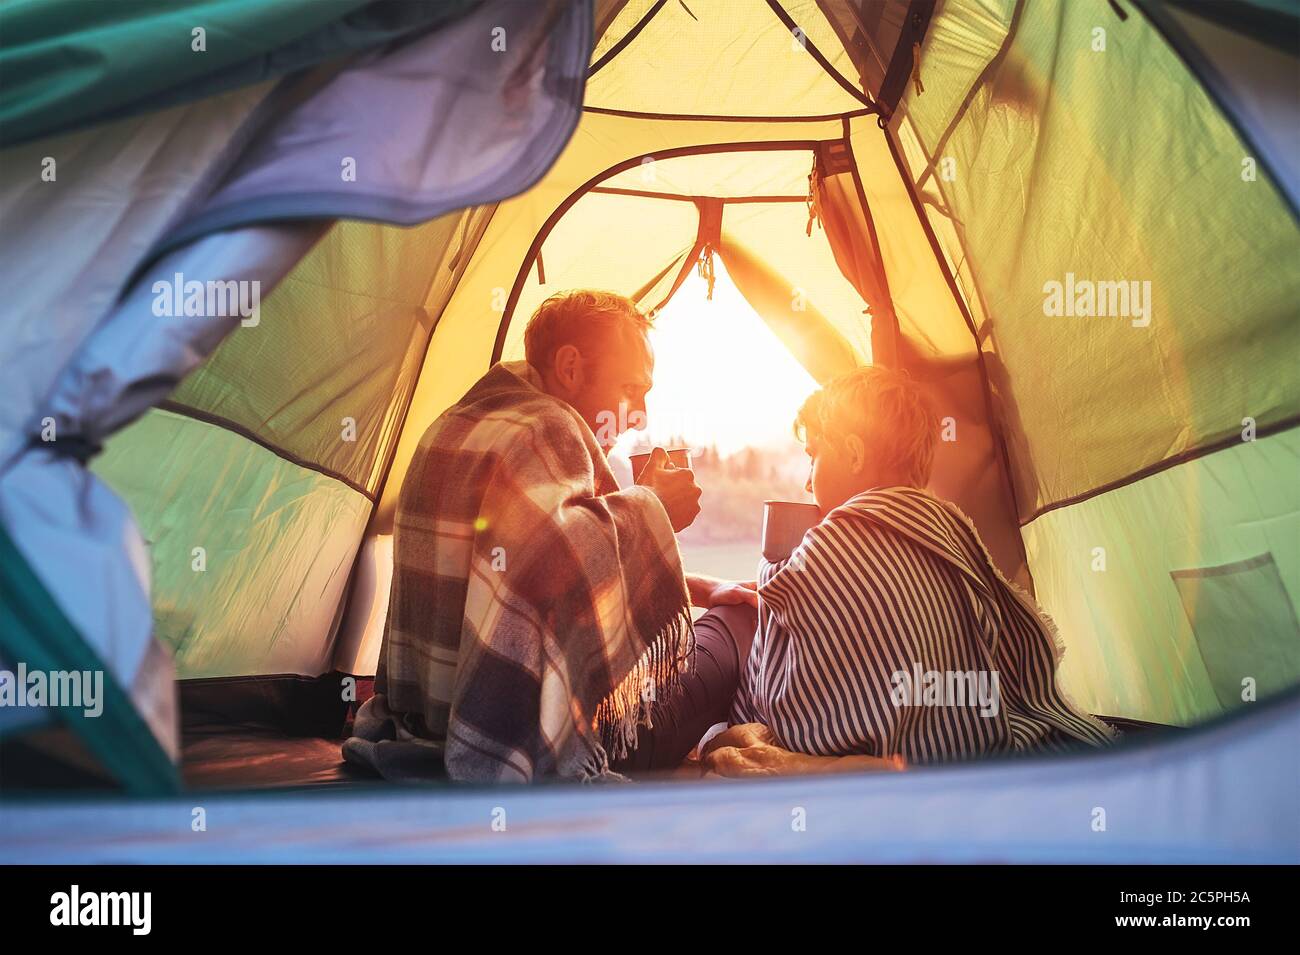 Father and son drink hot tea sitting together in camping tent. Traveling with kids and active people concept image. Stock Photo